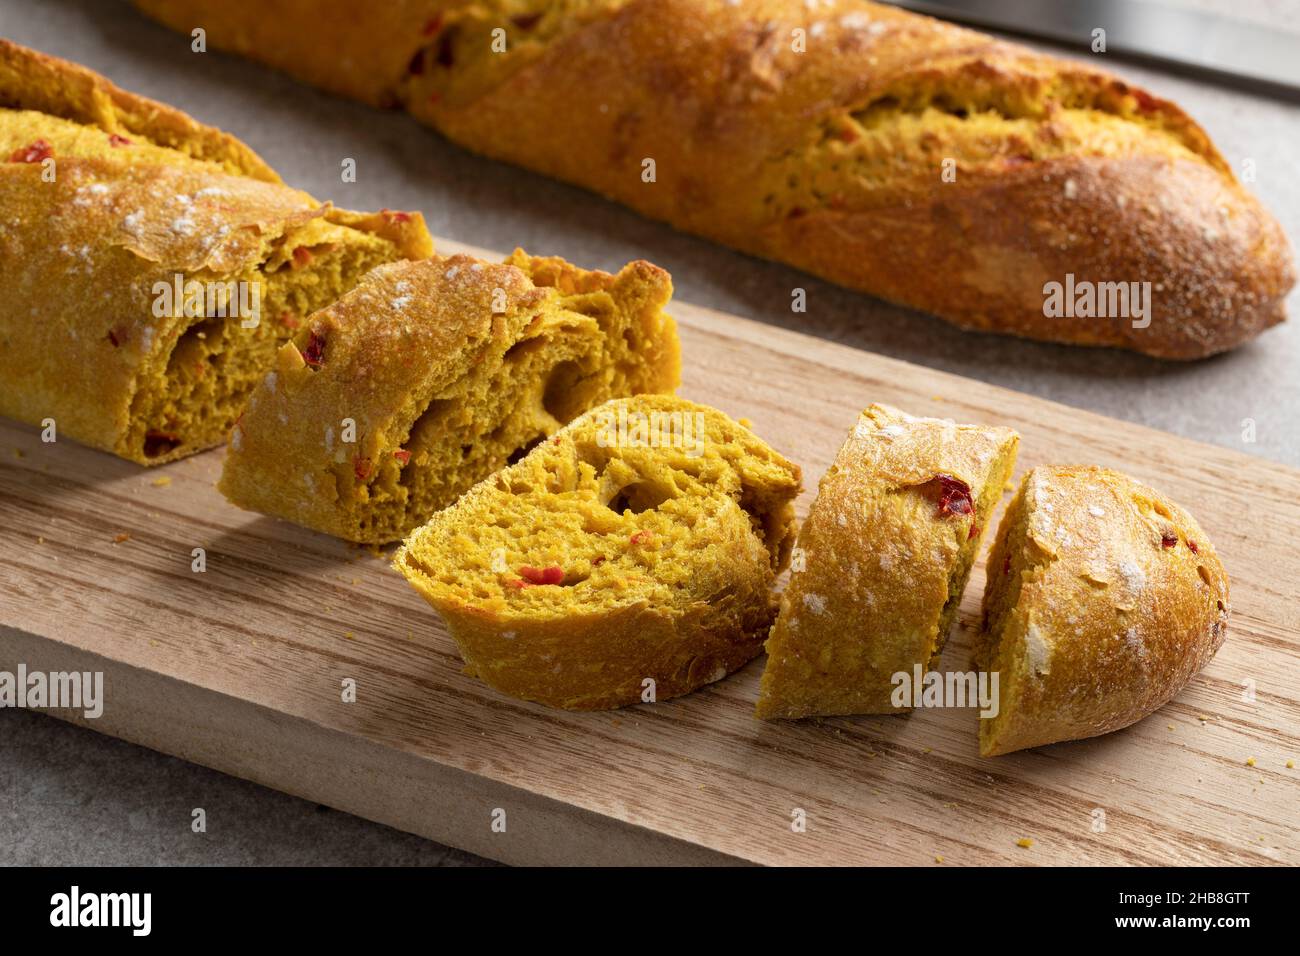 Fresh baked homemade baguette with curry and tomato seasoning close up at a wooden cutting board Stock Photo